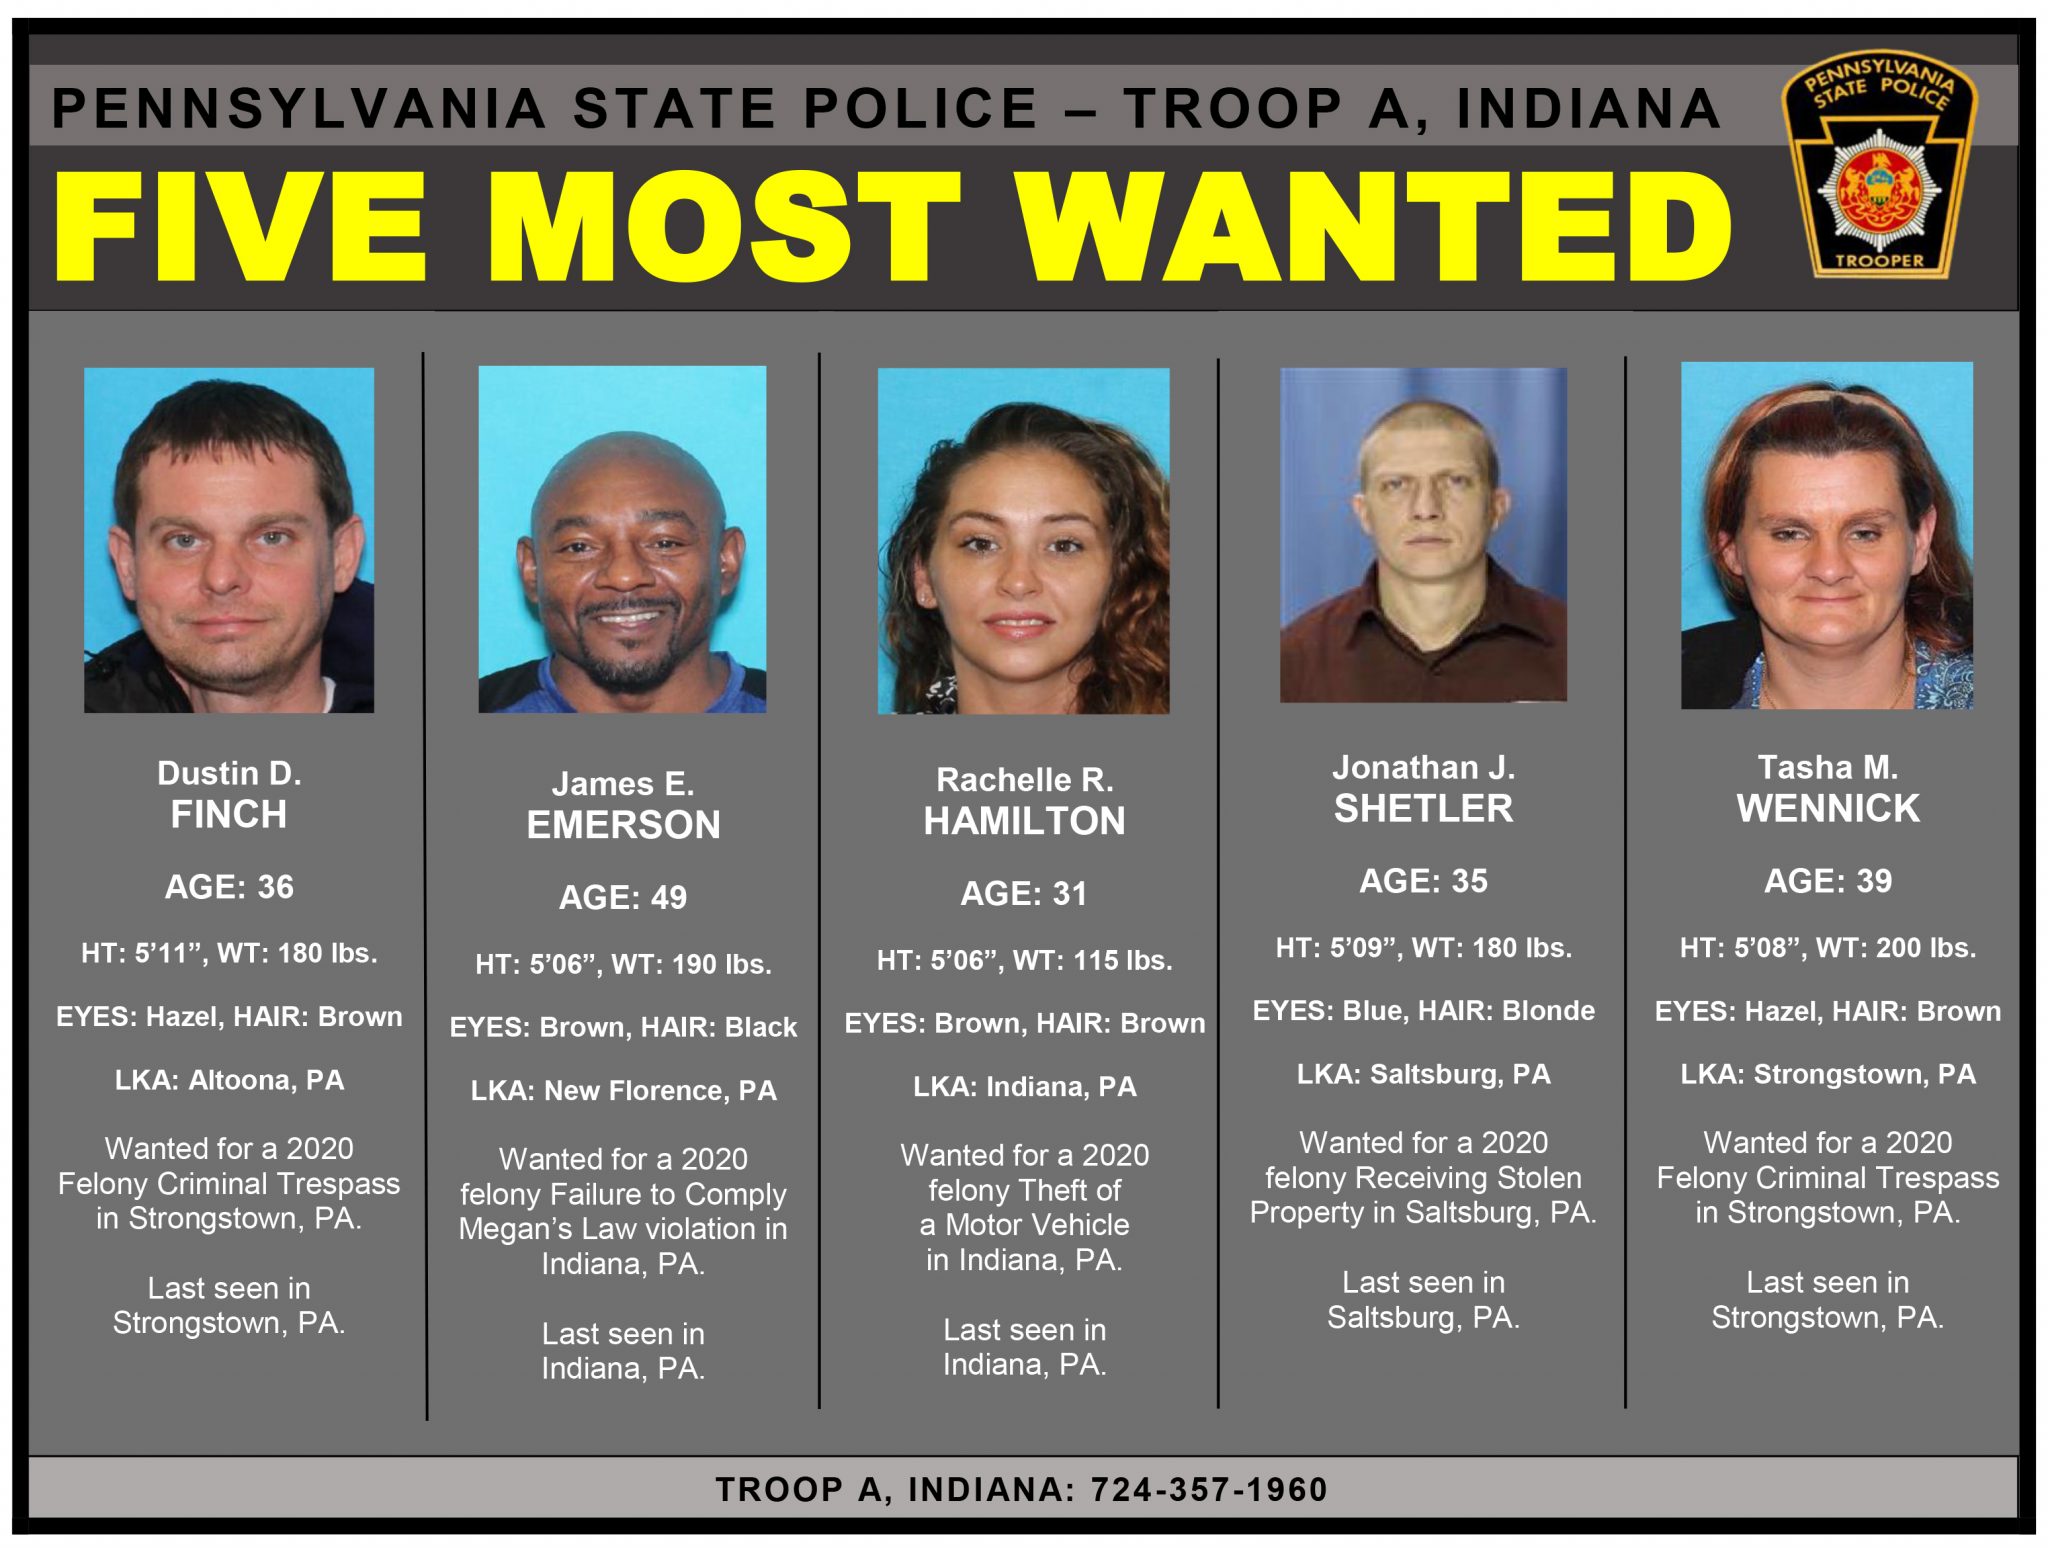 STATE POLICE RELEASE CURRENT FIVE MOST WANTED LIST WCCS AM1160 & 101.1FM